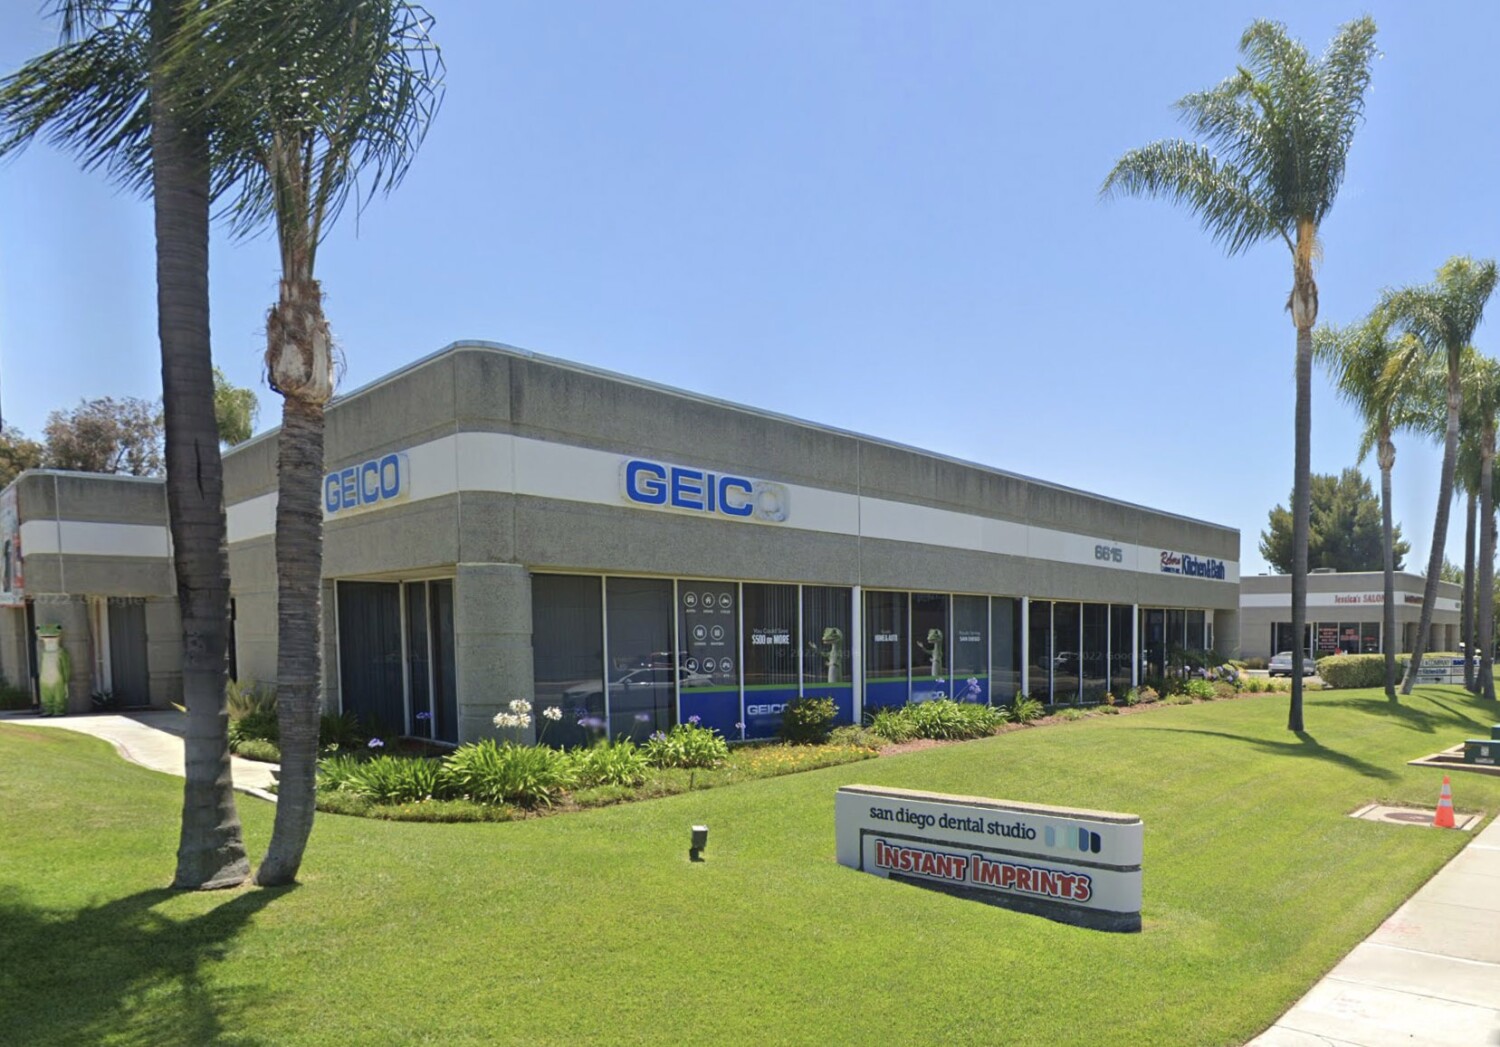 Geico closes all California locations, lays off more than 100